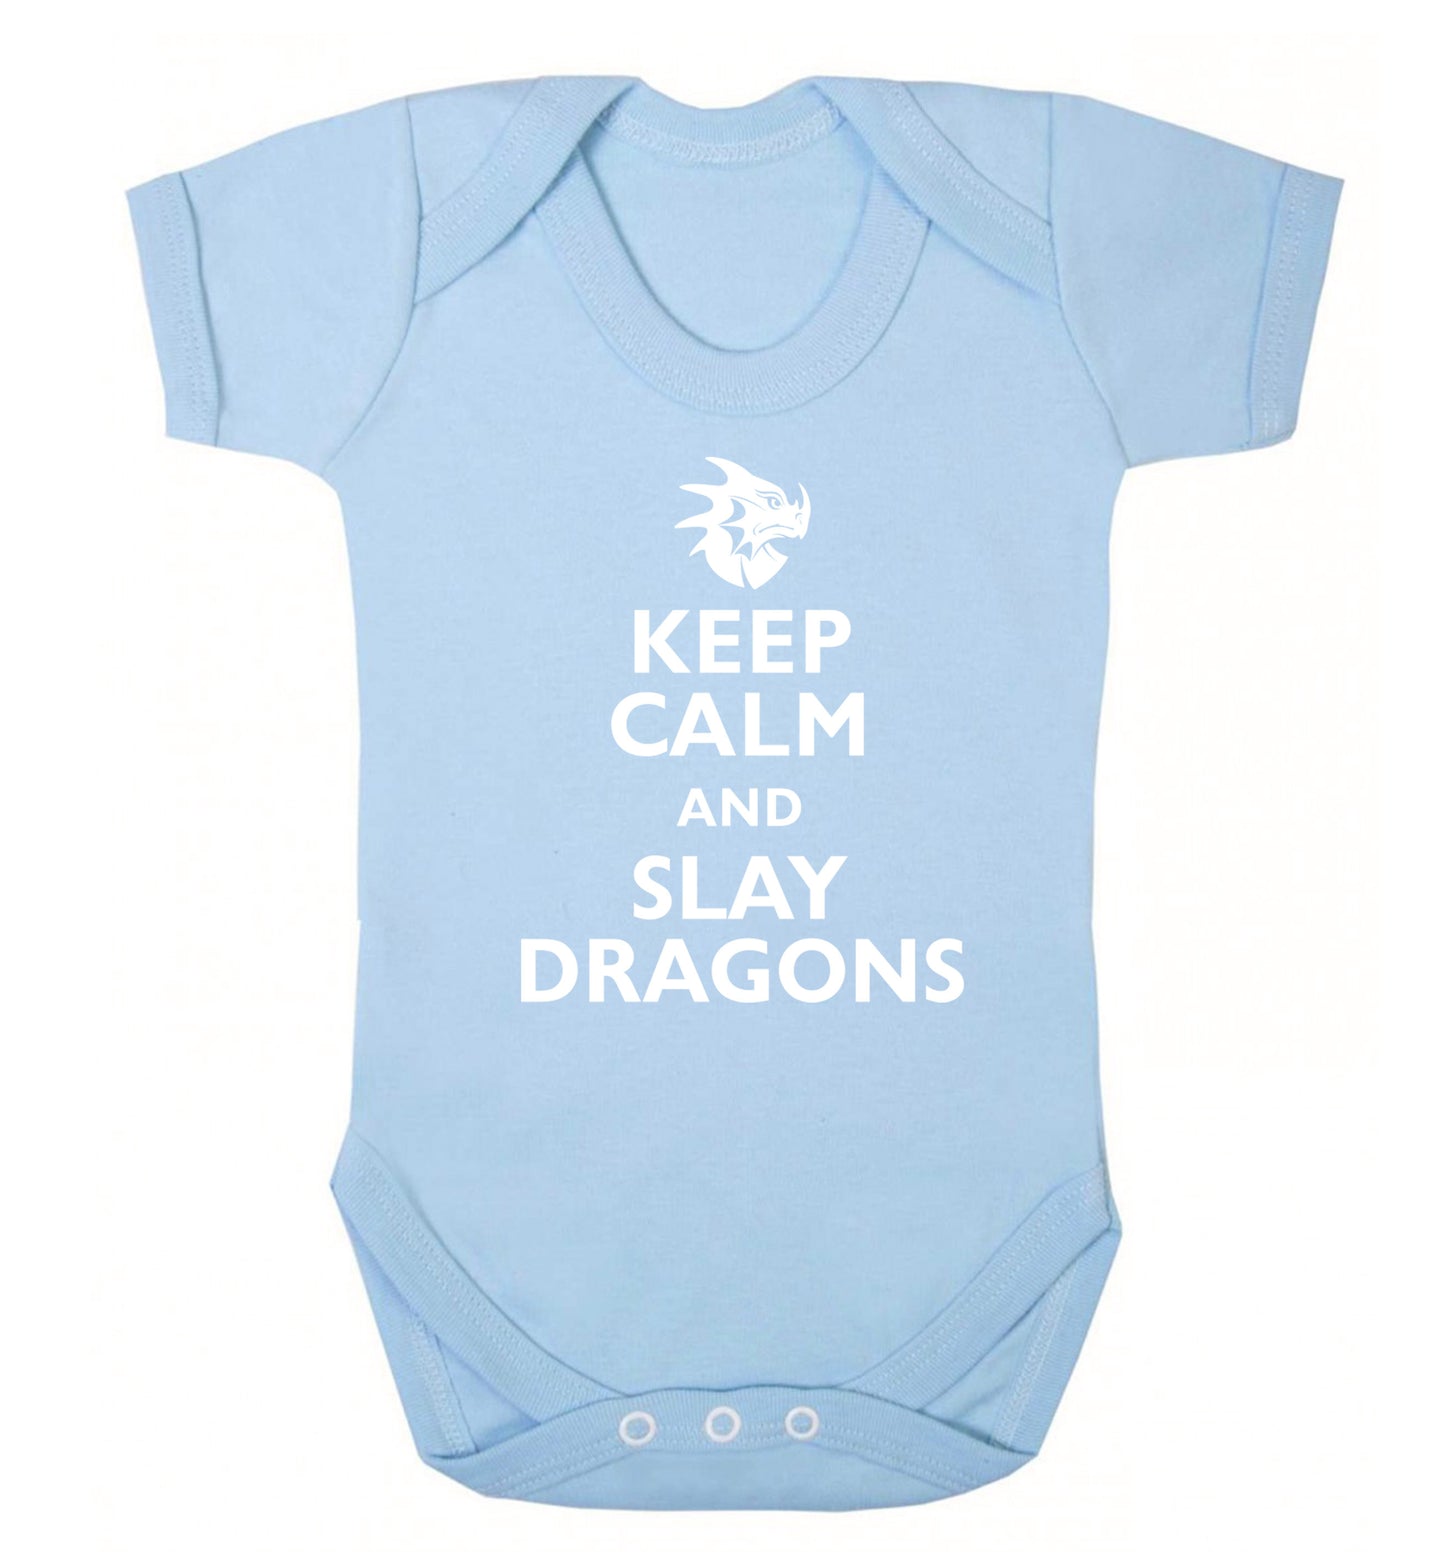 Keep calm and slay dragons Baby Vest pale blue 18-24 months